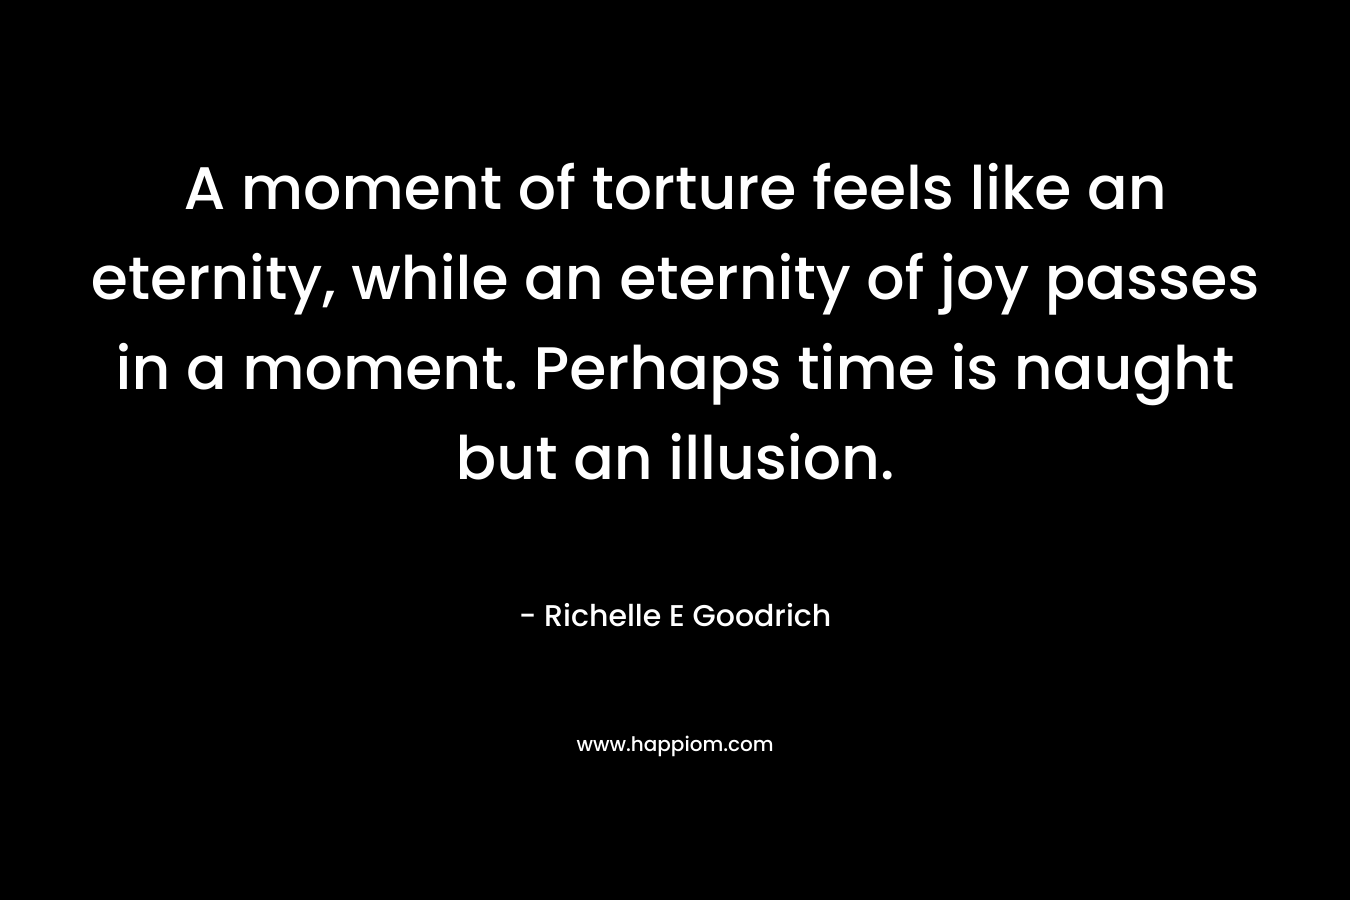 A moment of torture feels like an eternity, while an eternity of joy passes in a moment. Perhaps time is naught but an illusion. – Richelle E Goodrich